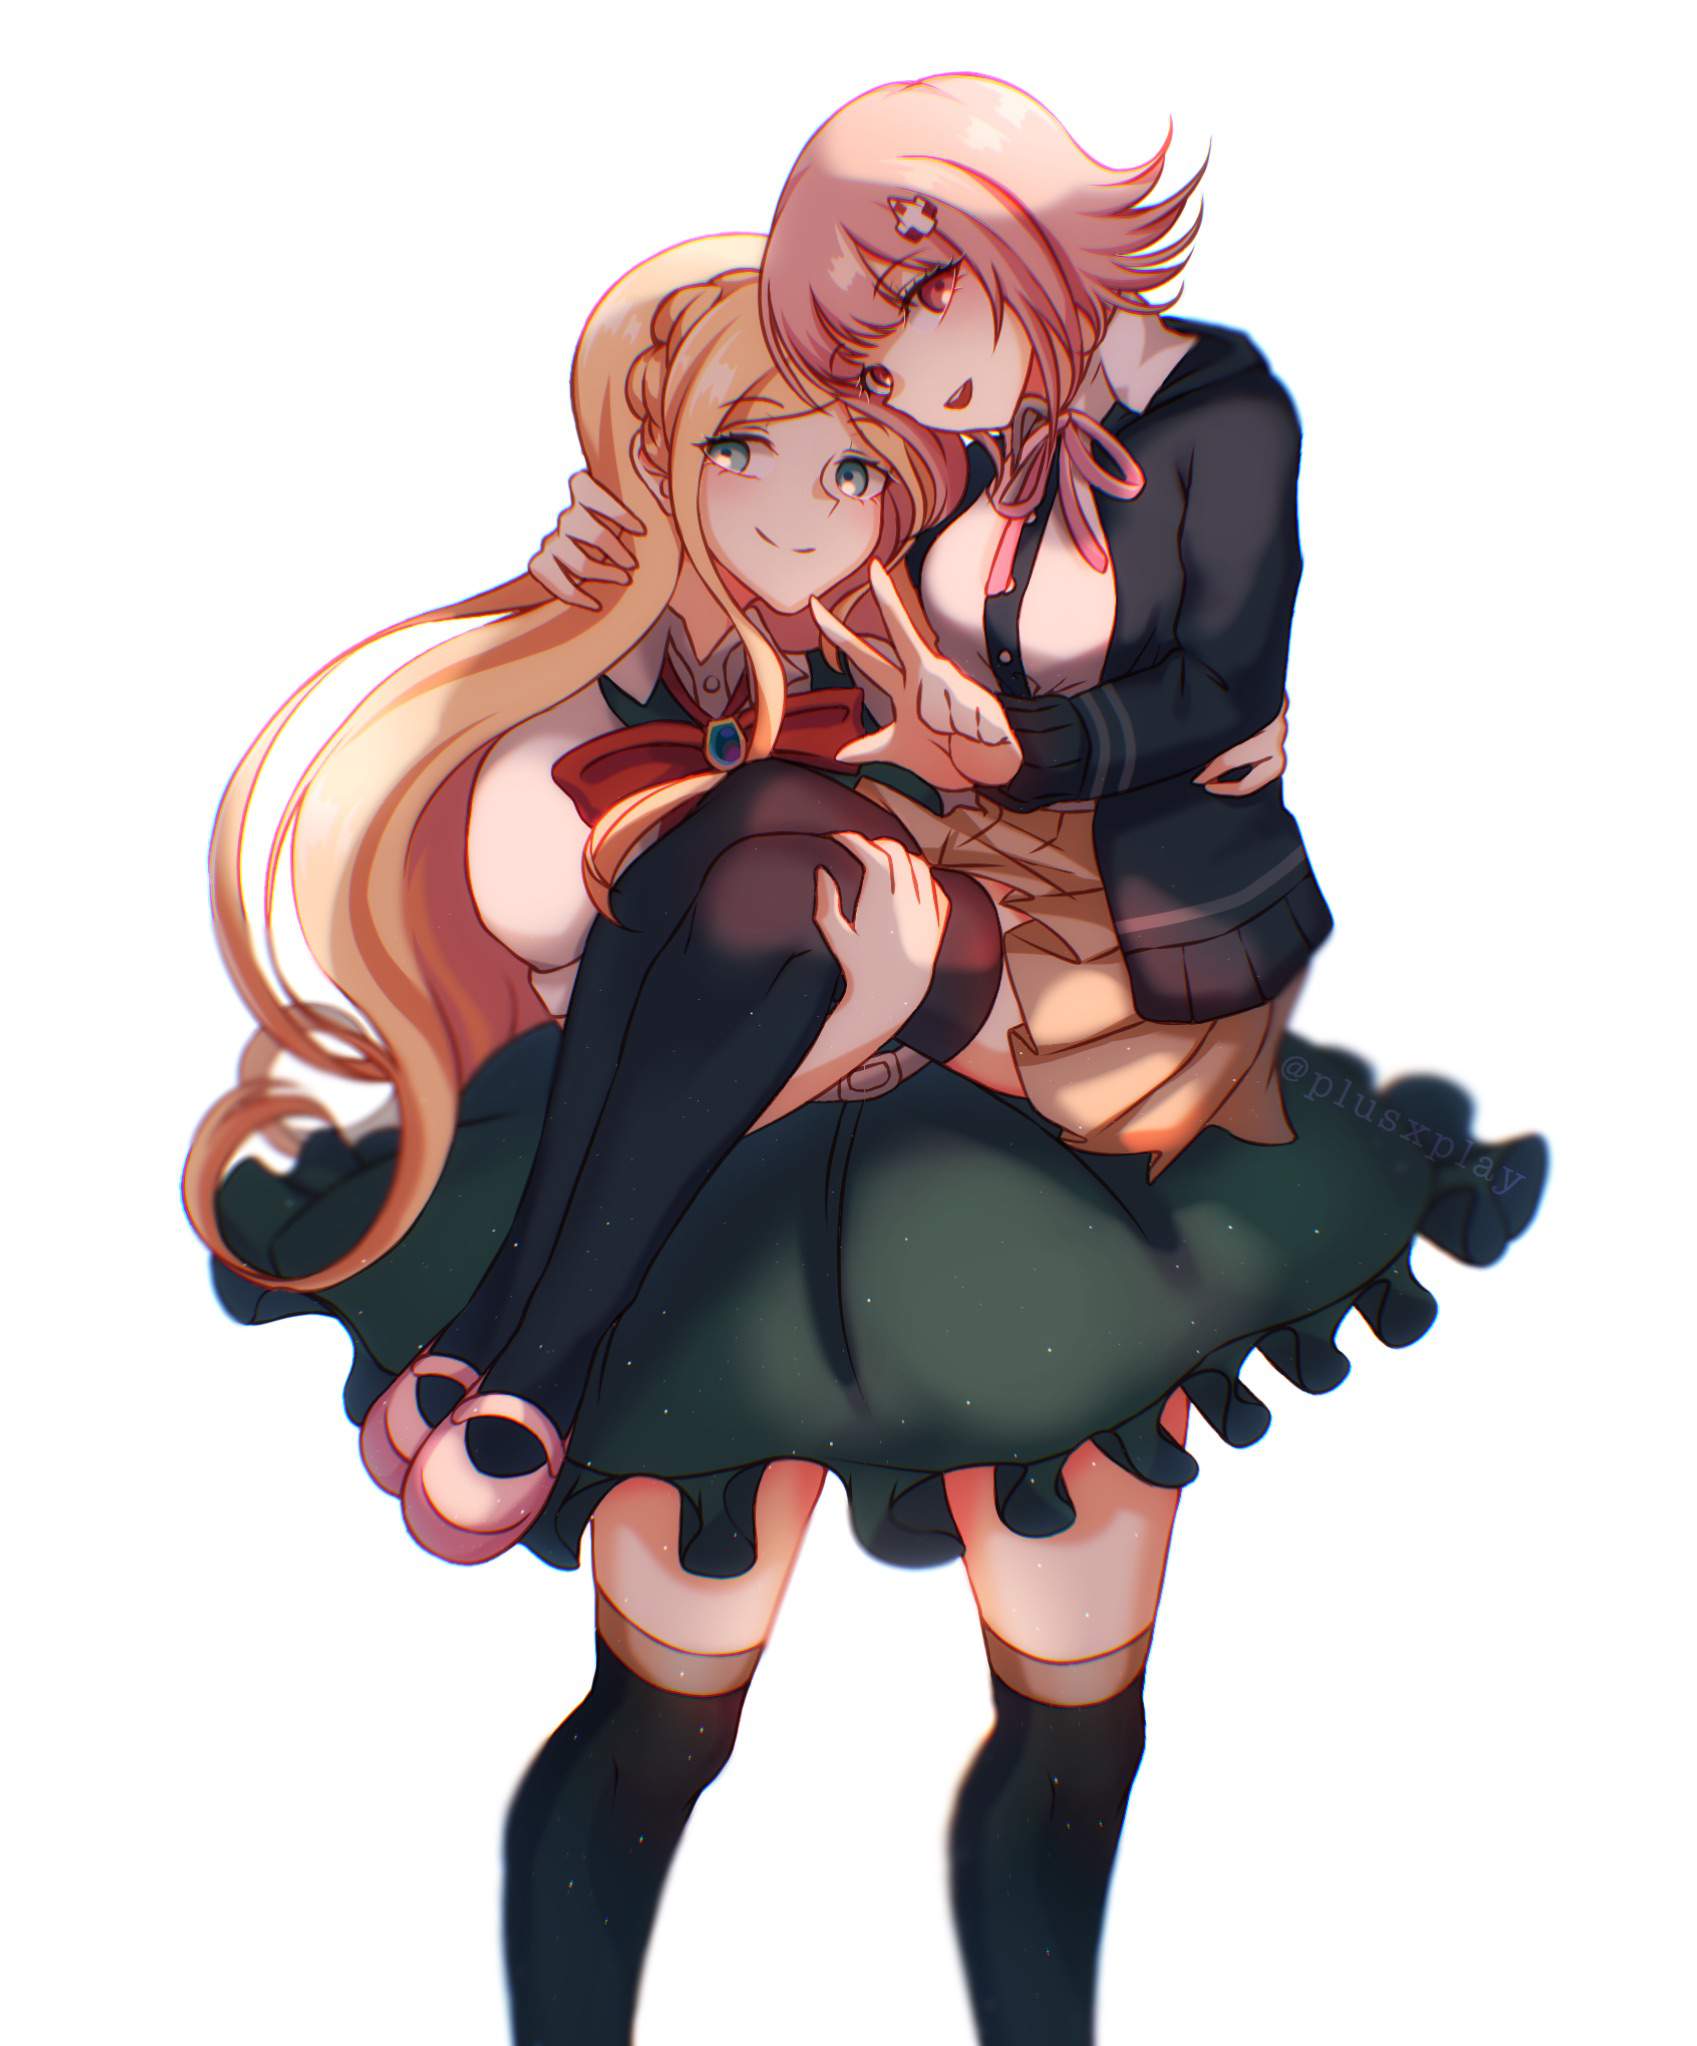 ✦—✦ Look at her, holding Chiaki up like a trophy UwU ✦—✦ ✦————— .